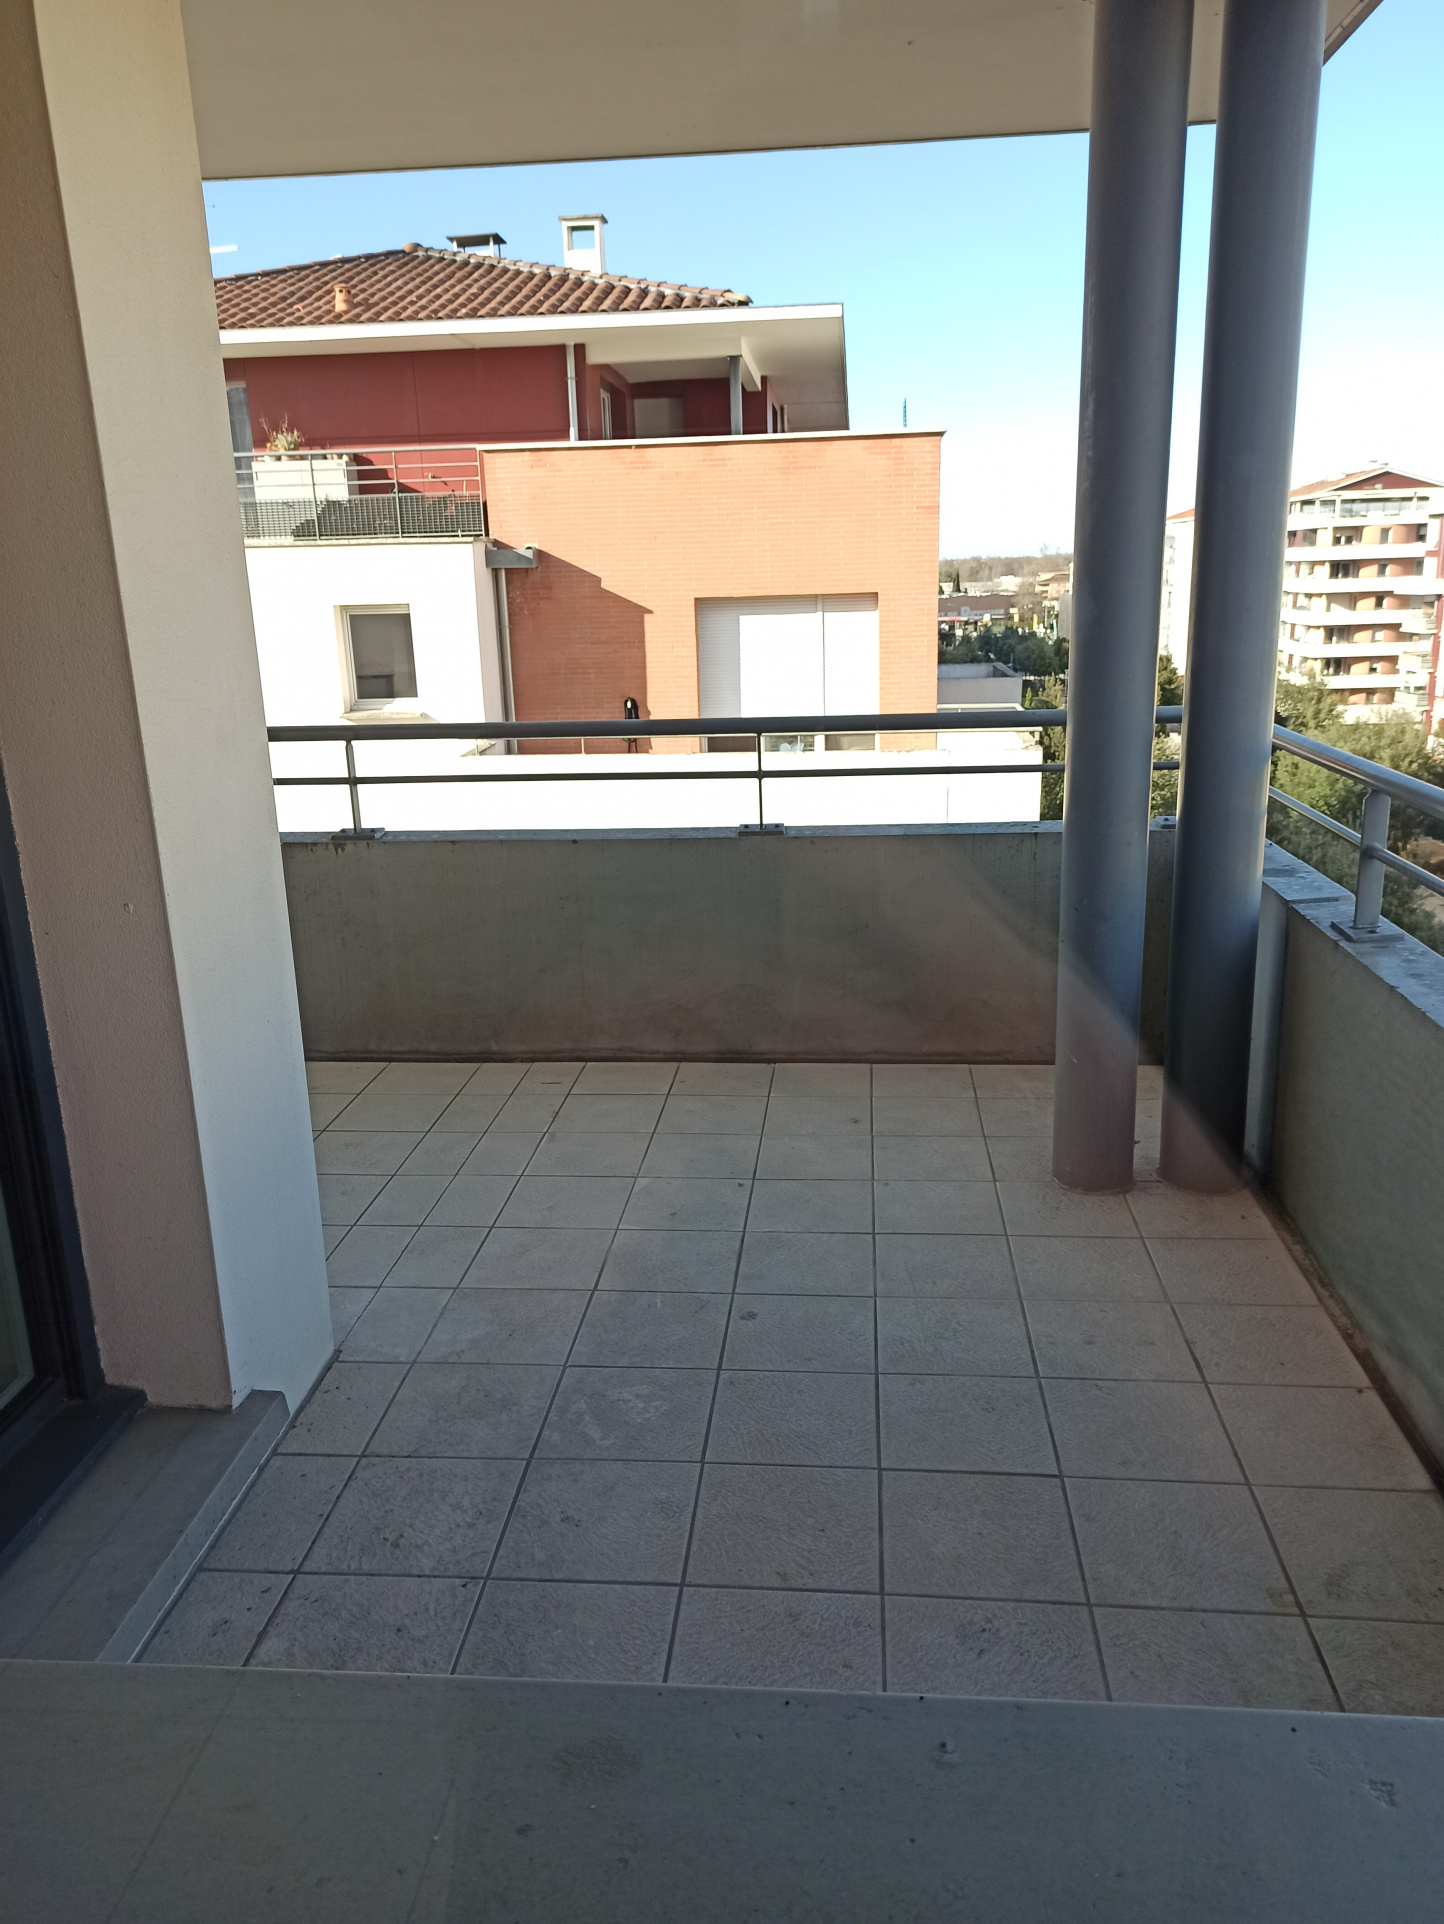 Toulouse,31200,3 Rooms Rooms,Appartement,1002